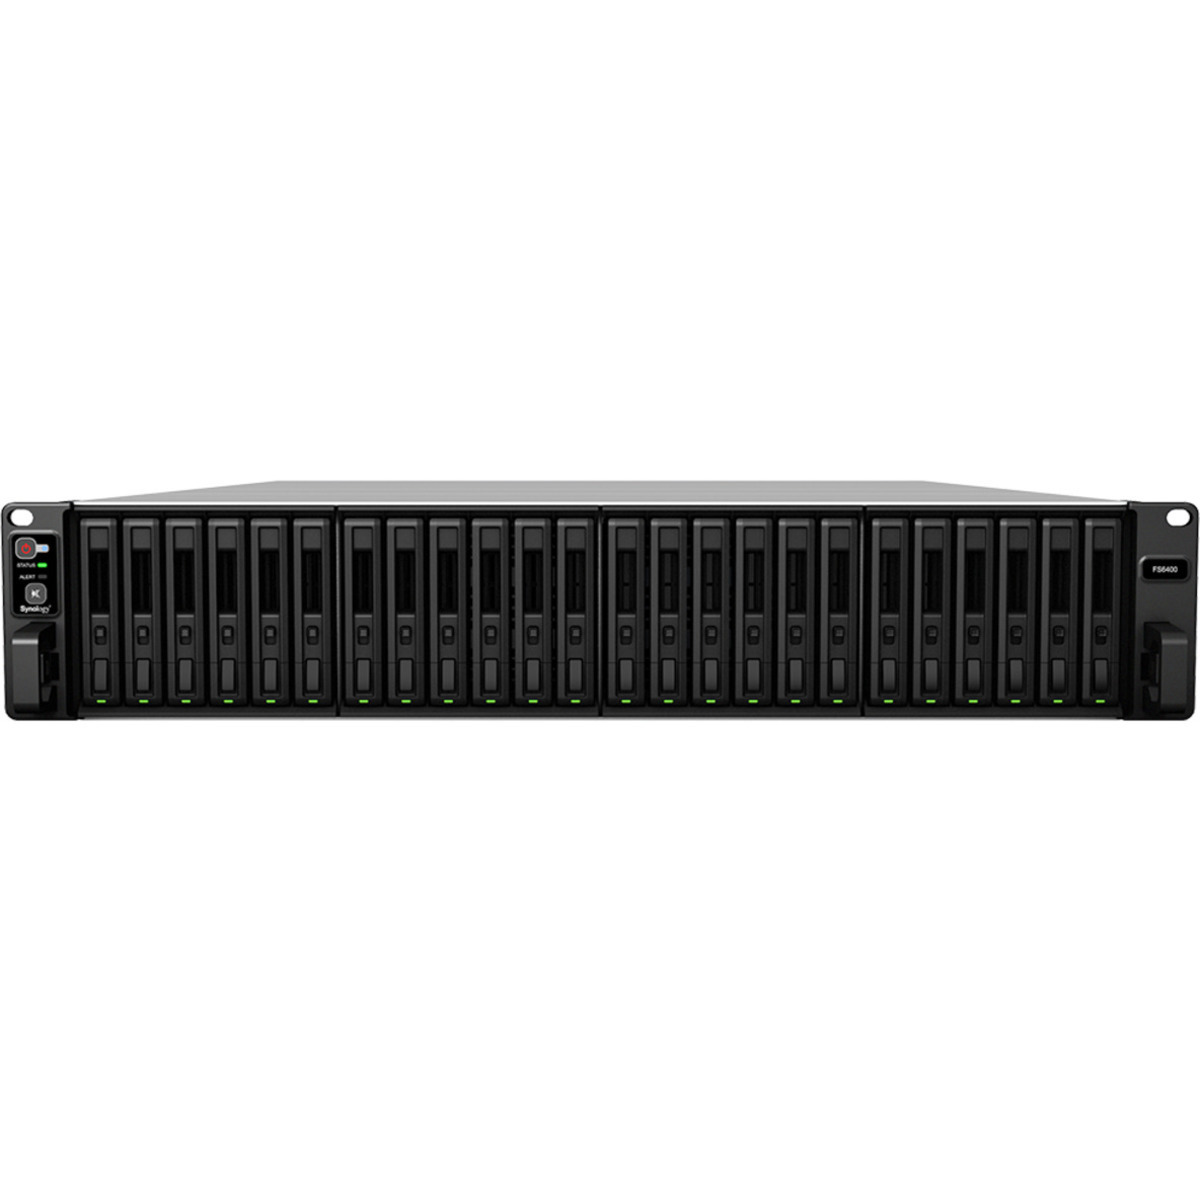 Synology FlashStation FS6400 140tb 24-Bay RackMount Large Business / Enterprise NAS - Network Attached Storage Device 20x7tb Synology SAT5210 Series SAT5210-7000G 2.5 530/500MB/s SATA 6Gb/s SSD ENTERPRISE Class Drives Installed - Burn-In Tested FlashStation FS6400